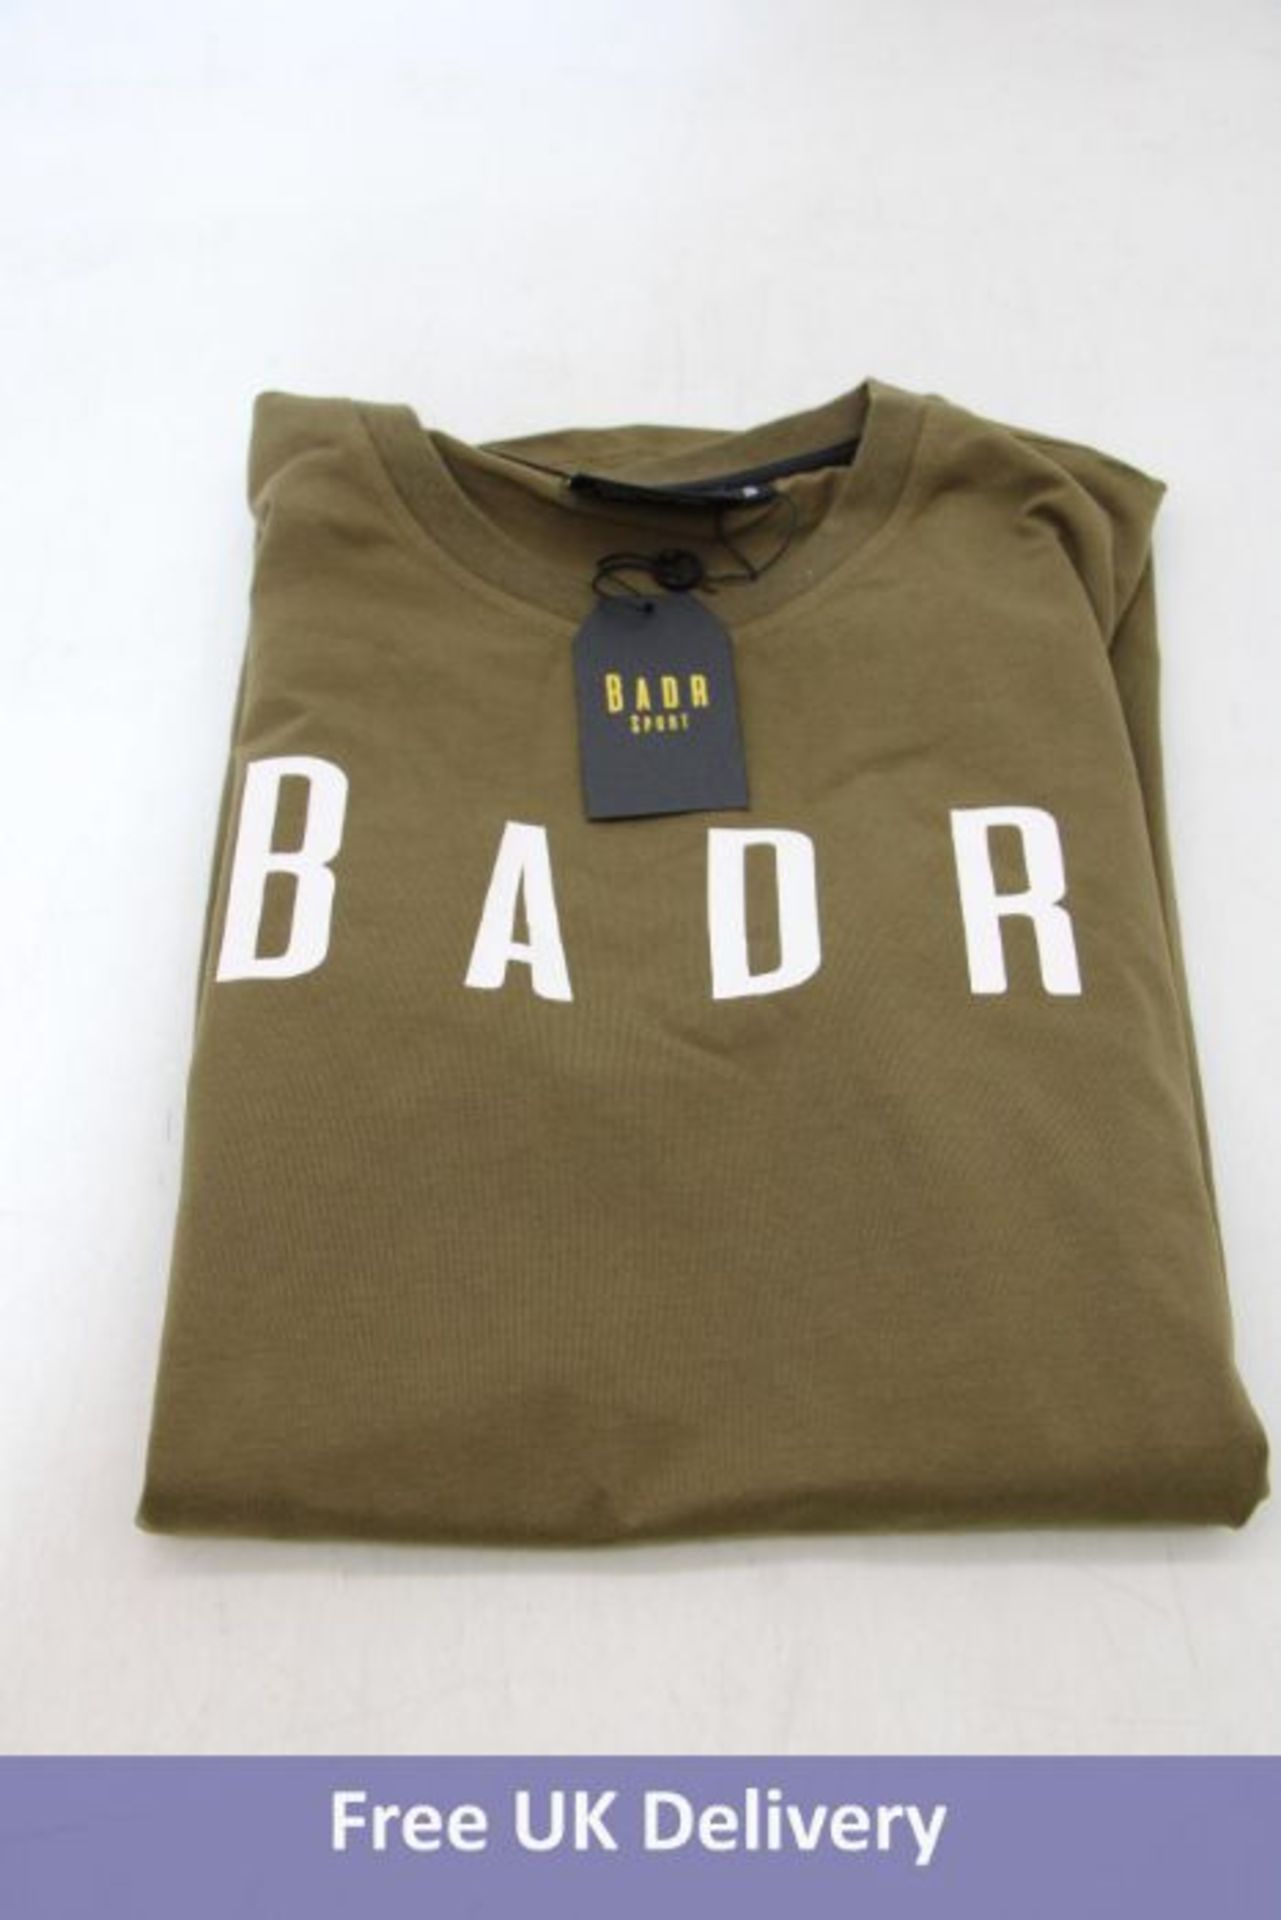 Two BADR Sport Men's Long Sleeved T-Shirts, Khaki, 1x Small and 1x X-Large